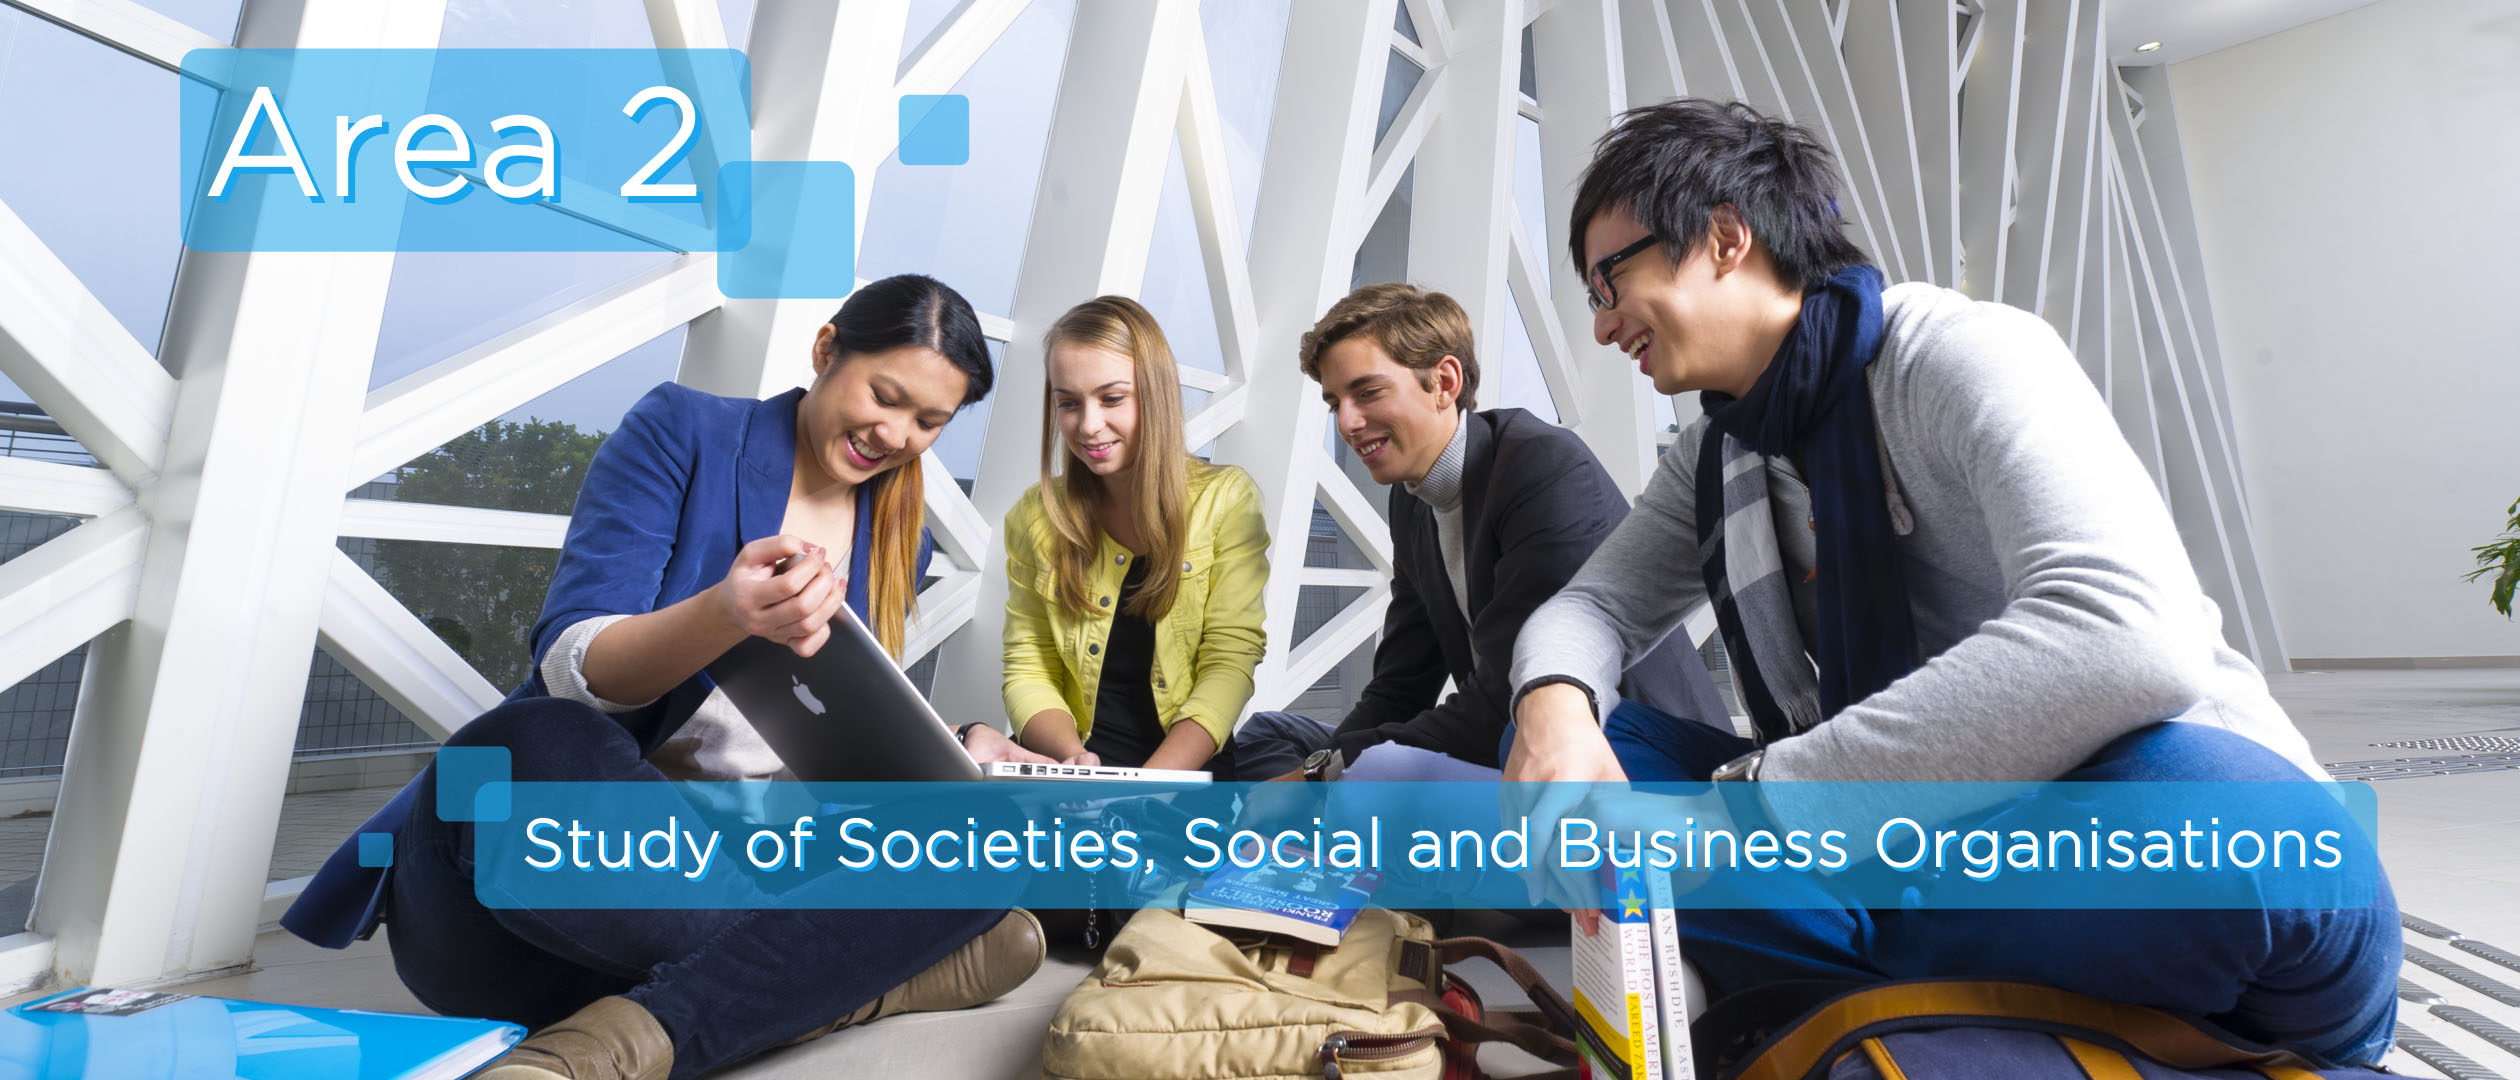 Study of Societies, Social and Business Organisations